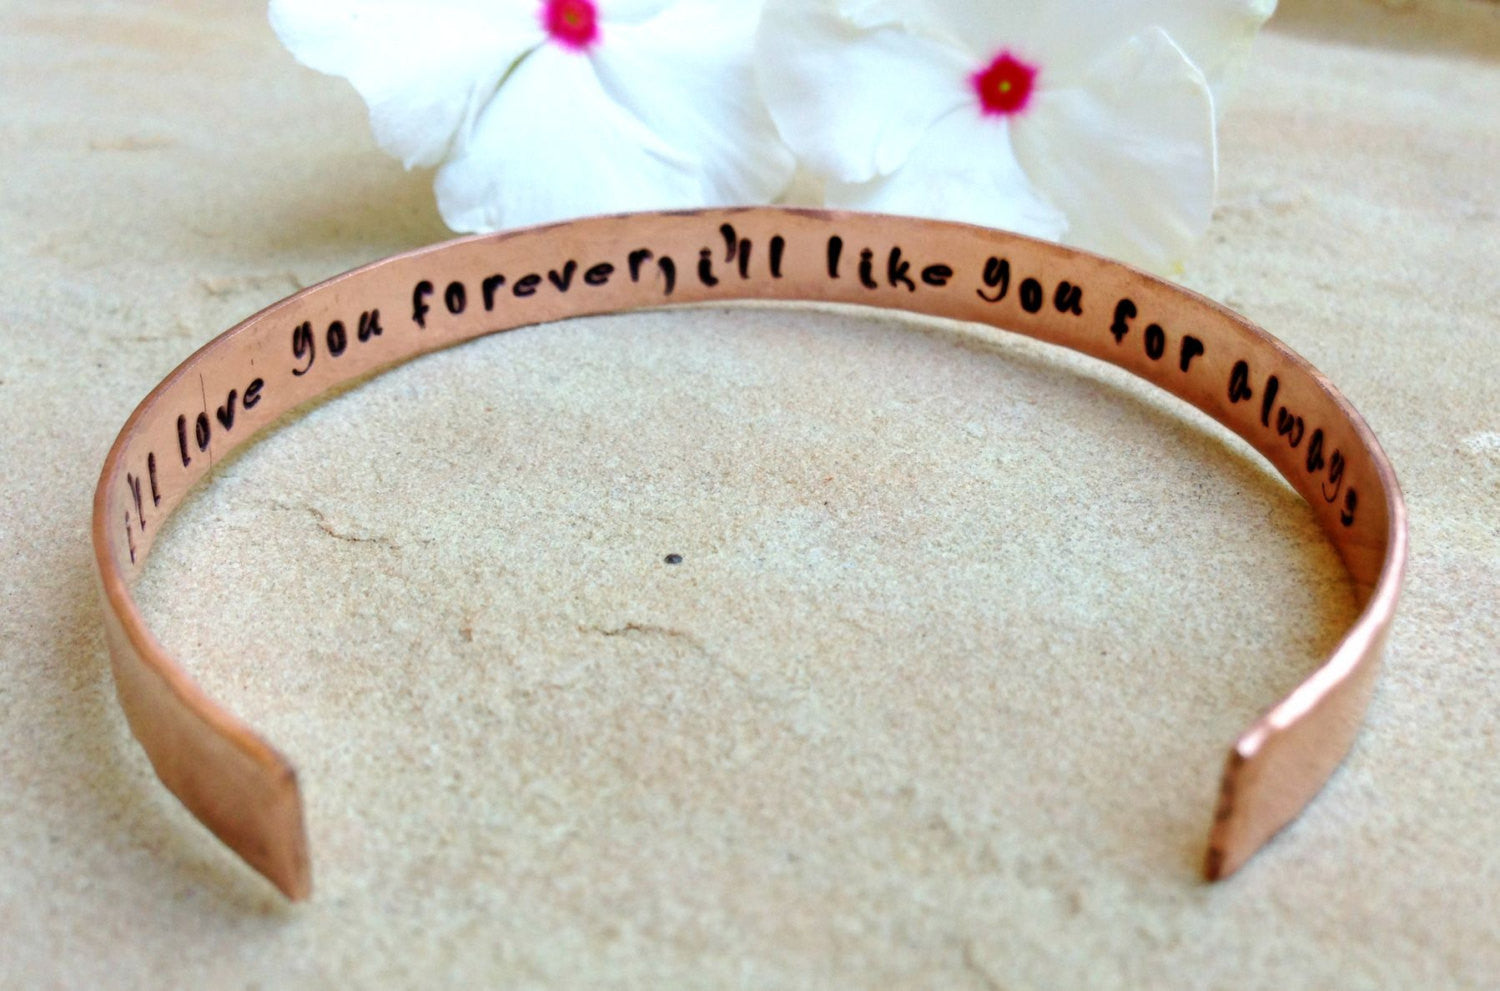 I'll Love You Forever I'll Like You For Always, Hand Stamped Cuff, Cuff Bracelet, Mother Daughter Gifts, Cuffs, Mothers Day, natashaaloha - Natashaaloha, jewelry, bracelets, necklace, keychains, fishing lures, gifts for men, charms, personalized, 